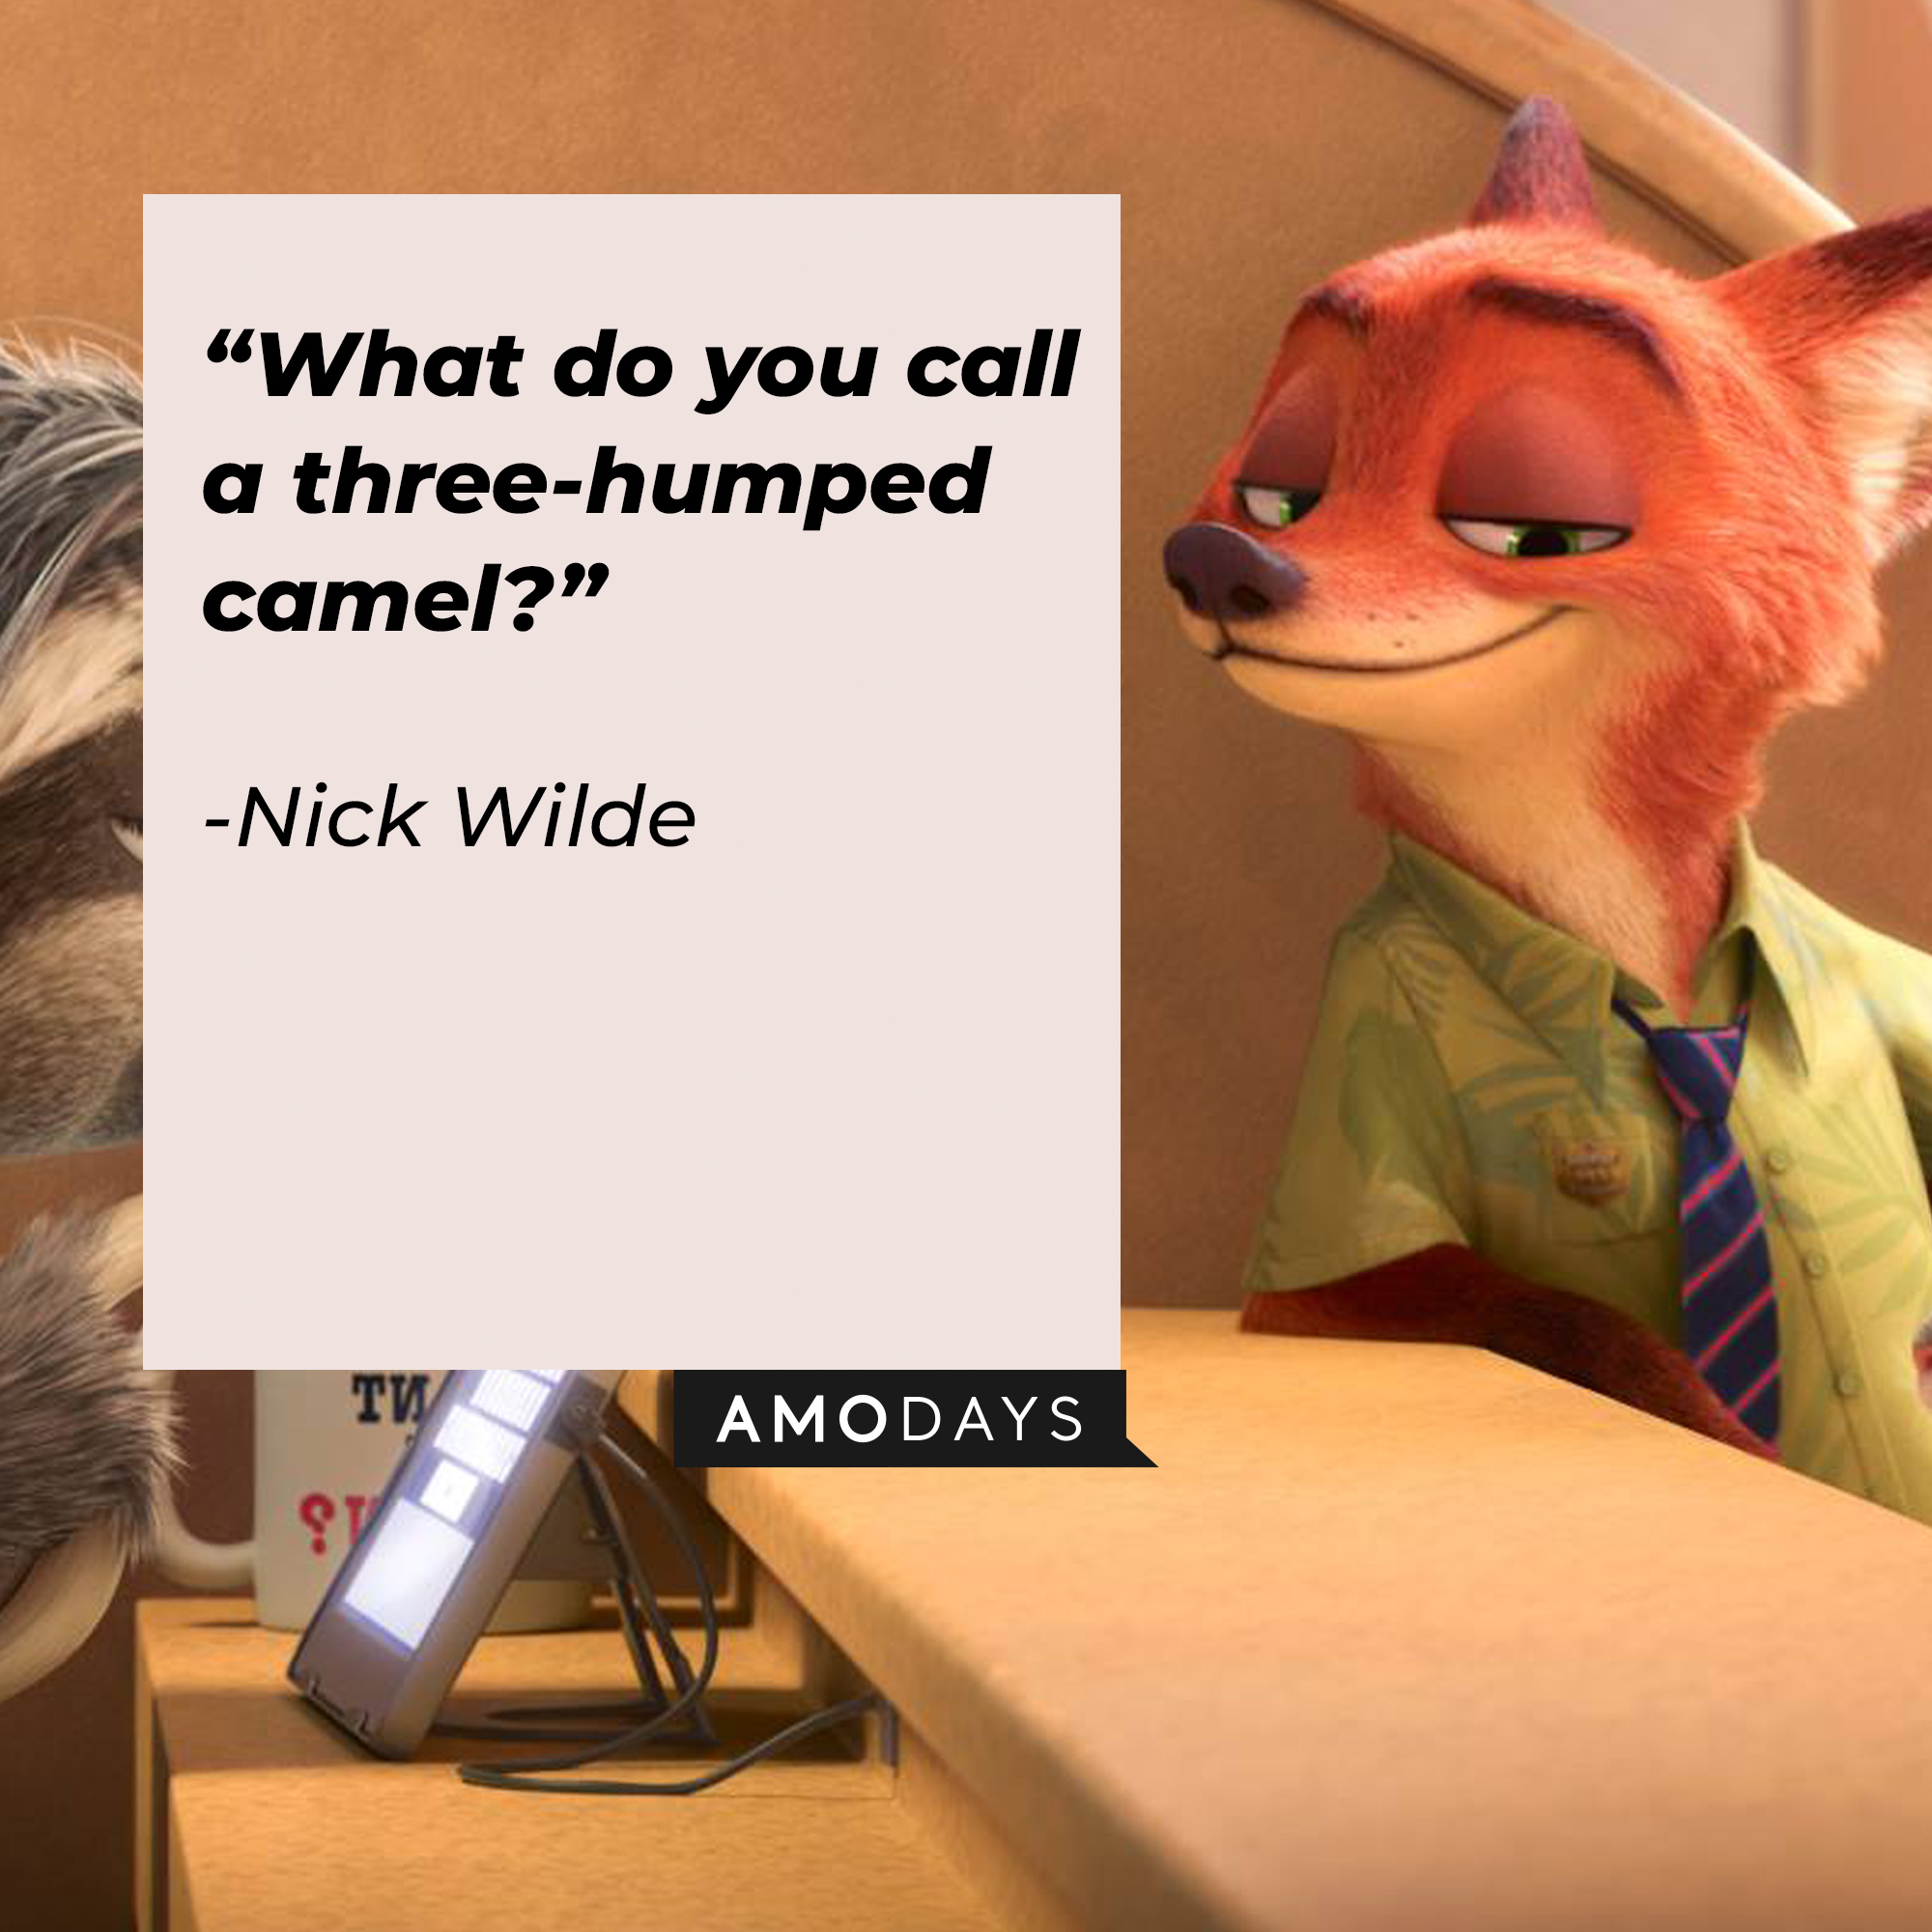 Nick Wilde, with his quote: “What do you call a three-humped camel?” | Source: facebook.com/DisneyZootopia